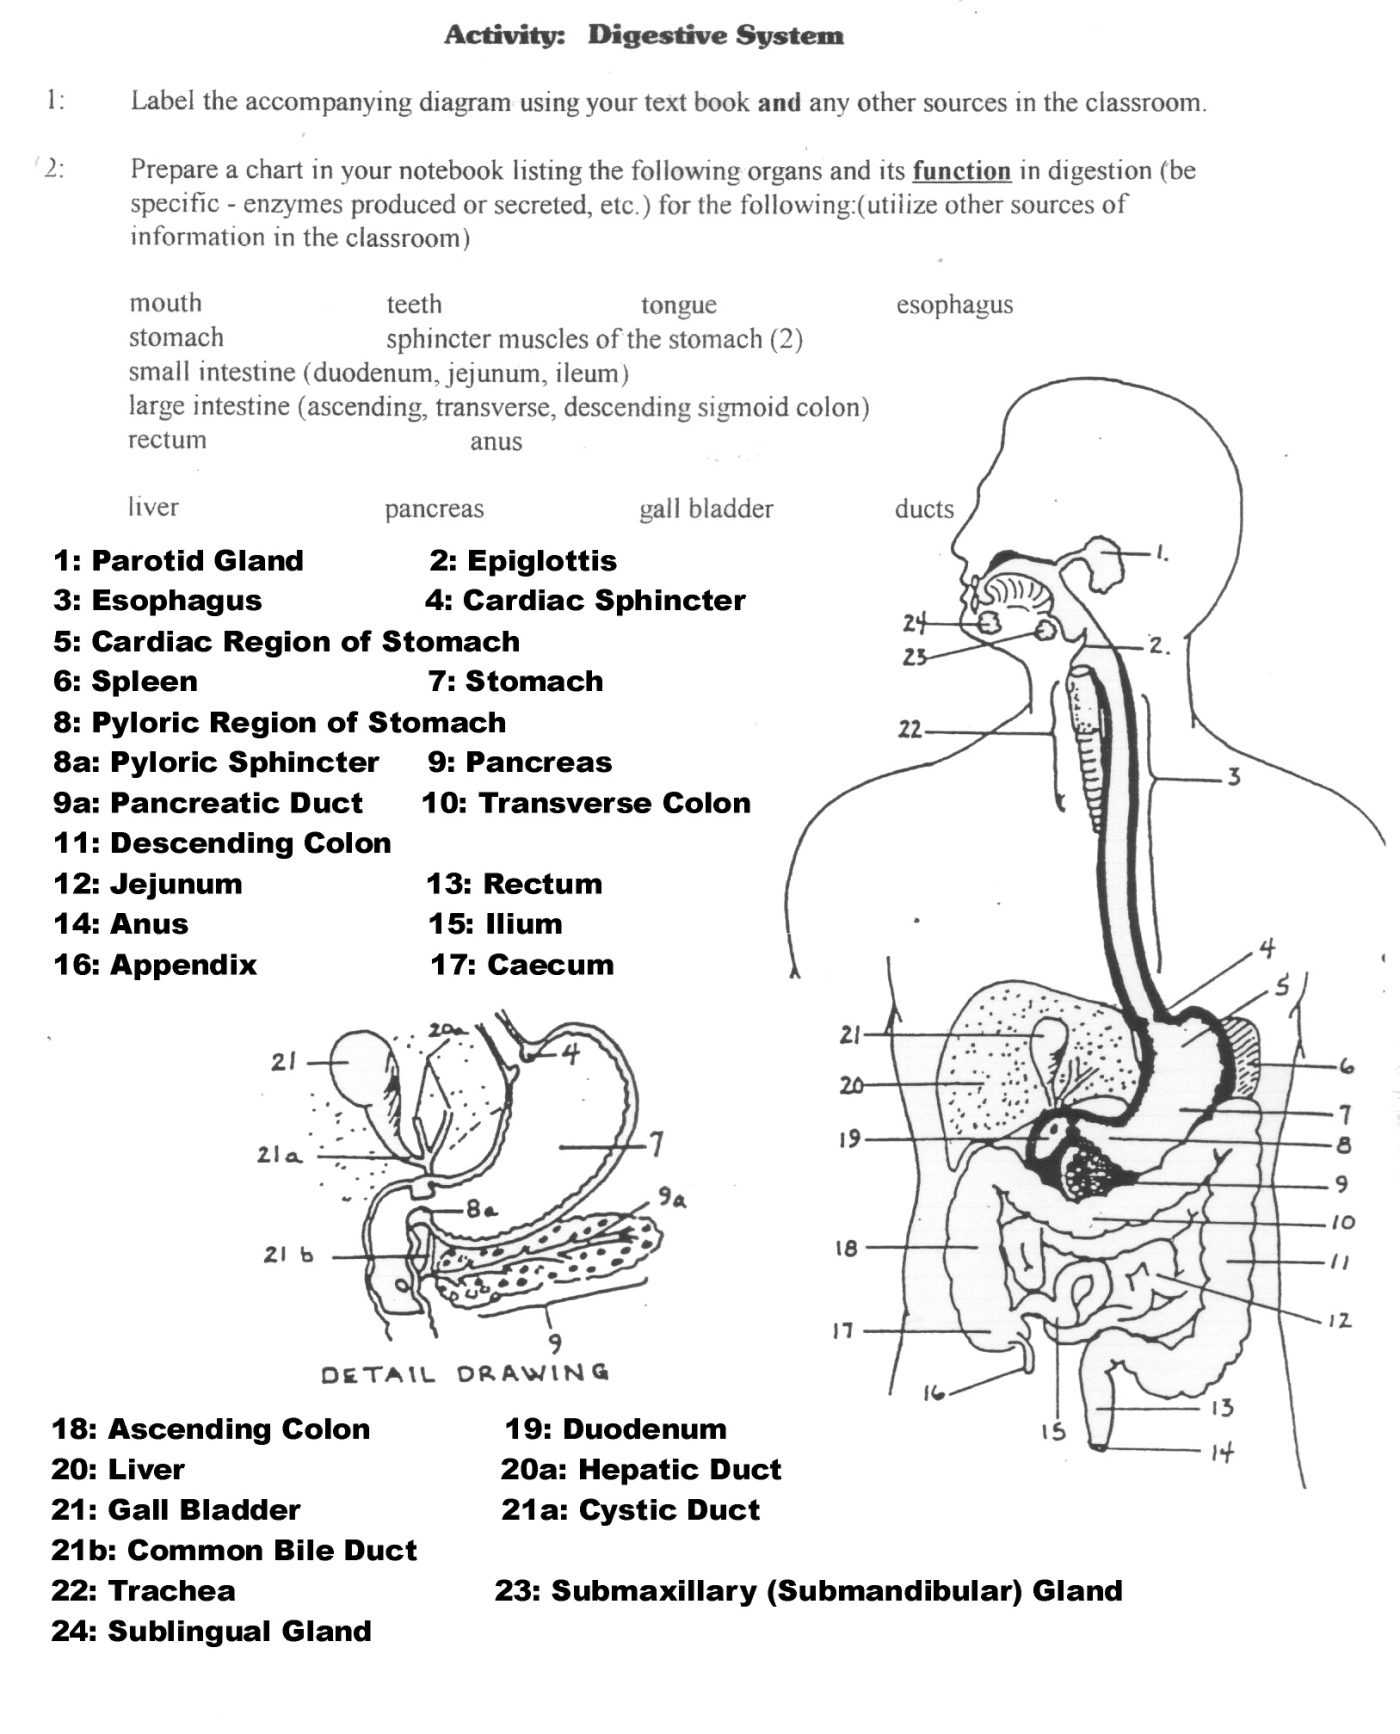 Digestive System Worksheet Answers together with Digestive System Crossword Puzzle Pdf High Resolution with